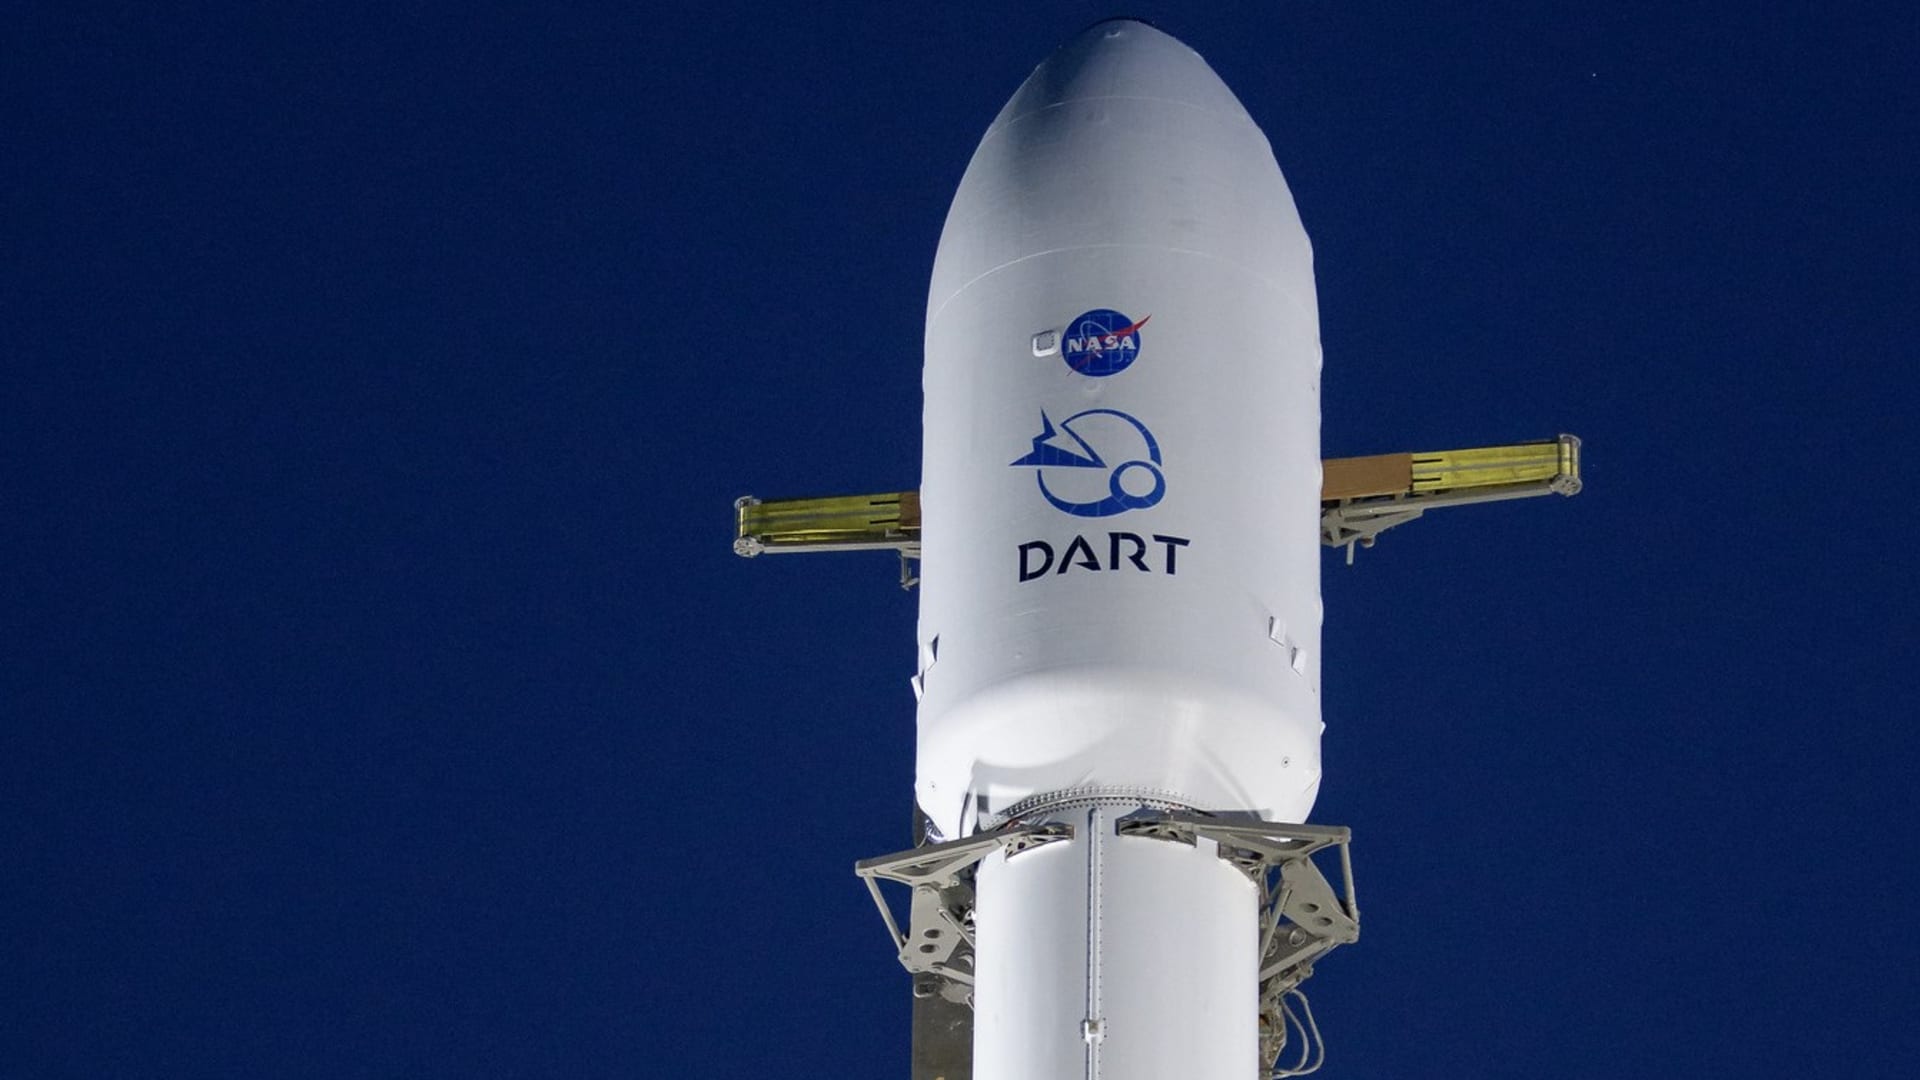 SpaceX launching NASA DART spacecraft to crash into an asteroid